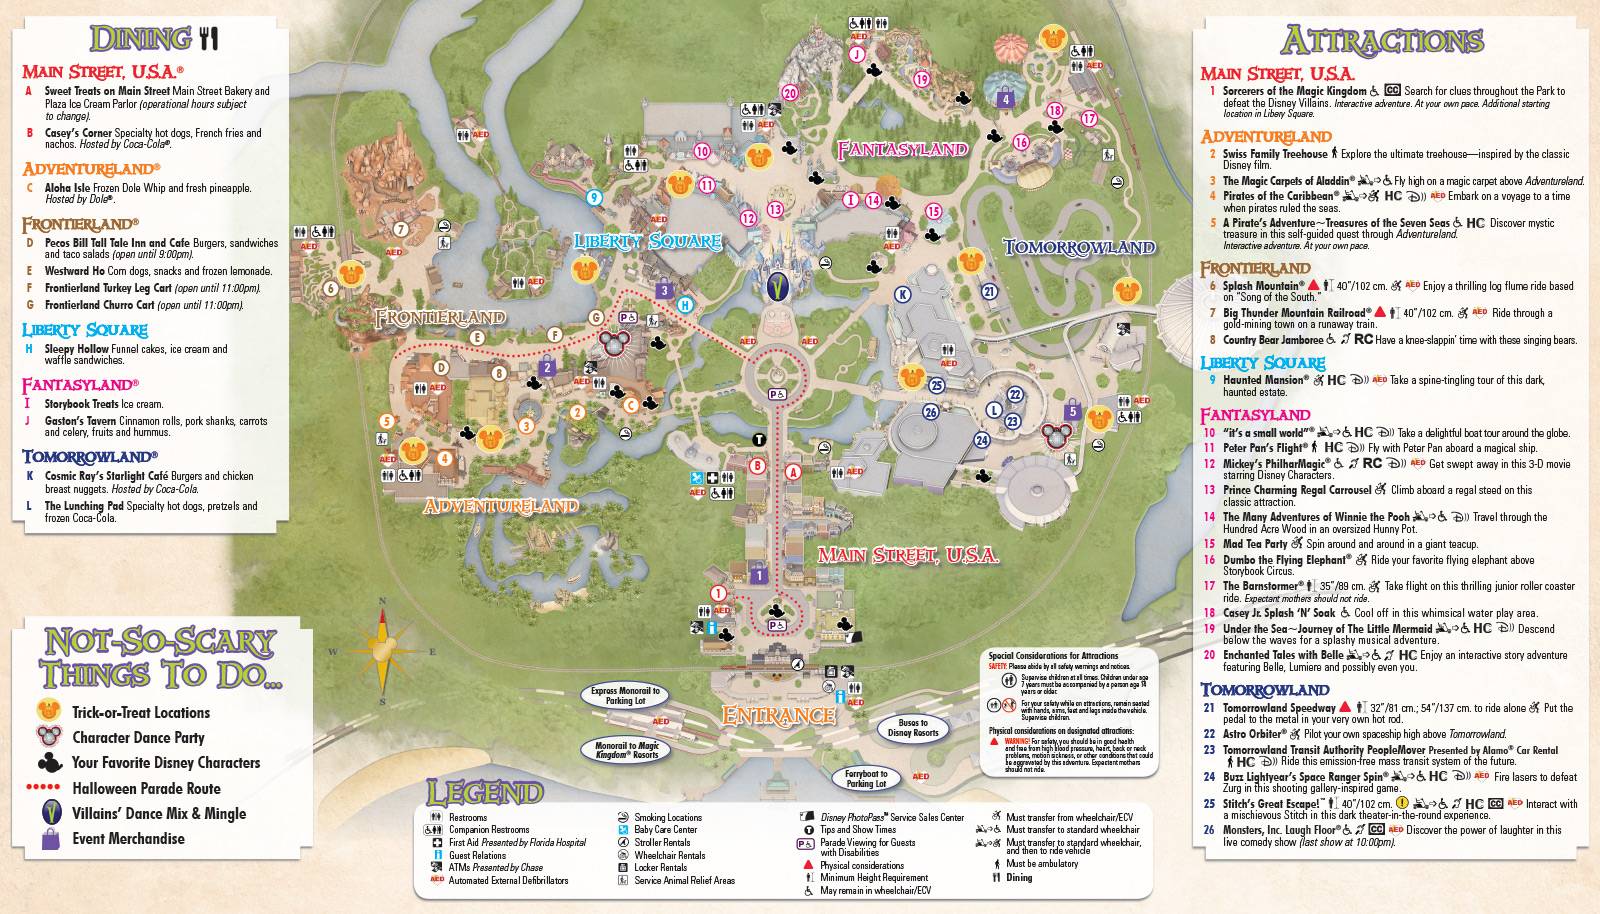 Mickey's Not-So-Scary Halloween Party guide map and schedule now available